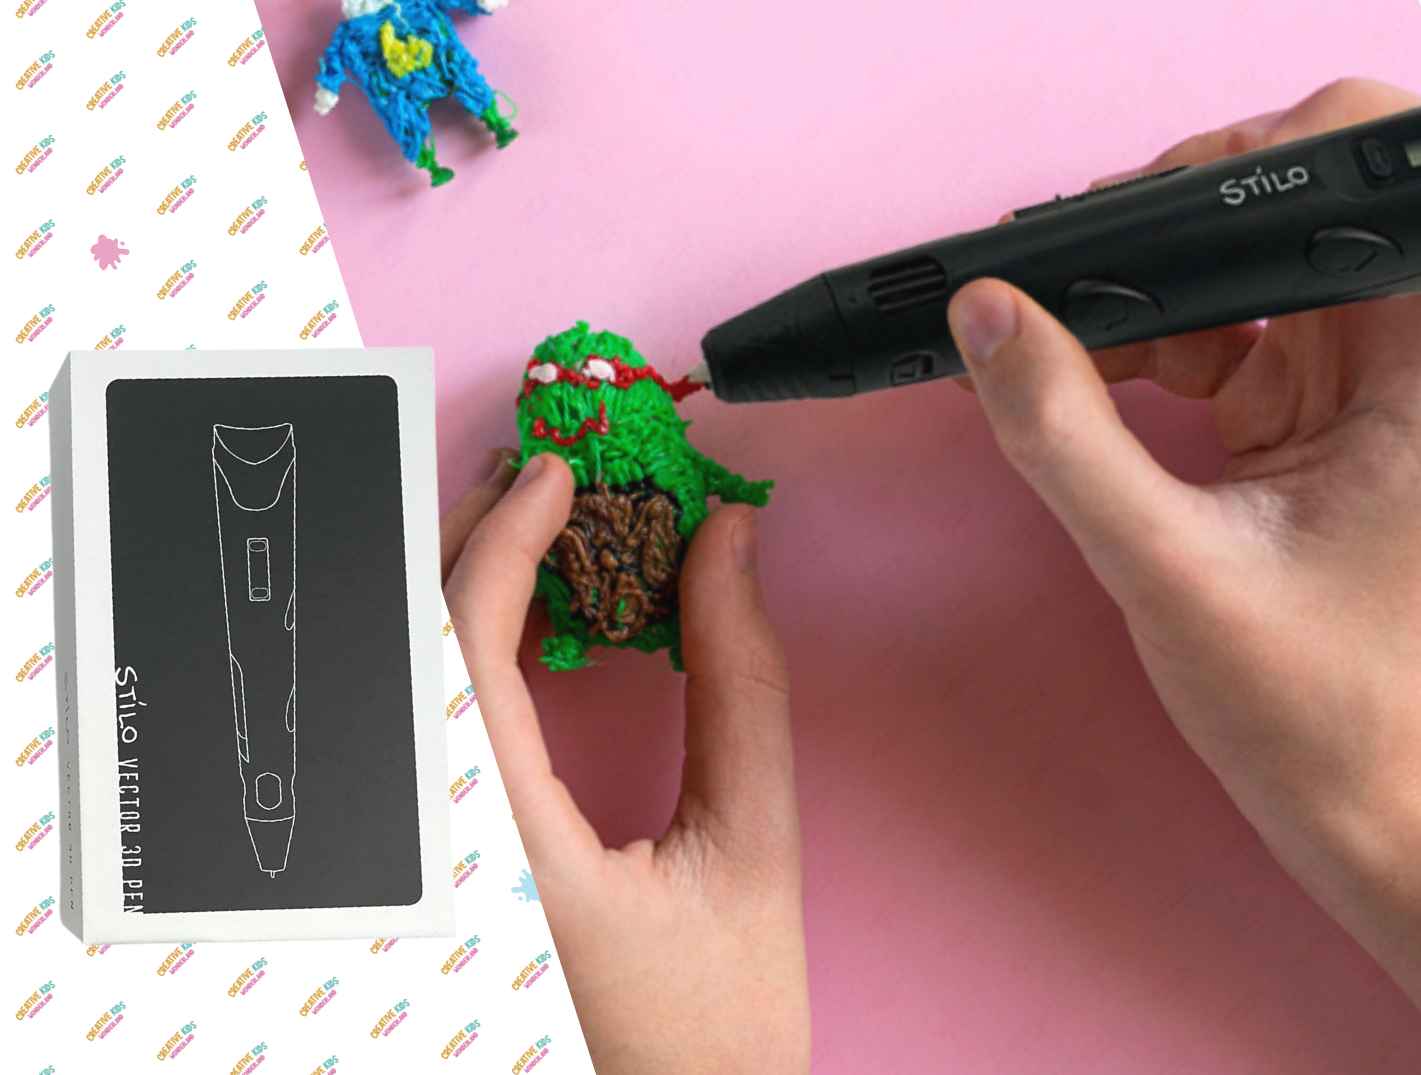 3D Printing Pen Kits for Kids, with PLA Filament Refills, 3D